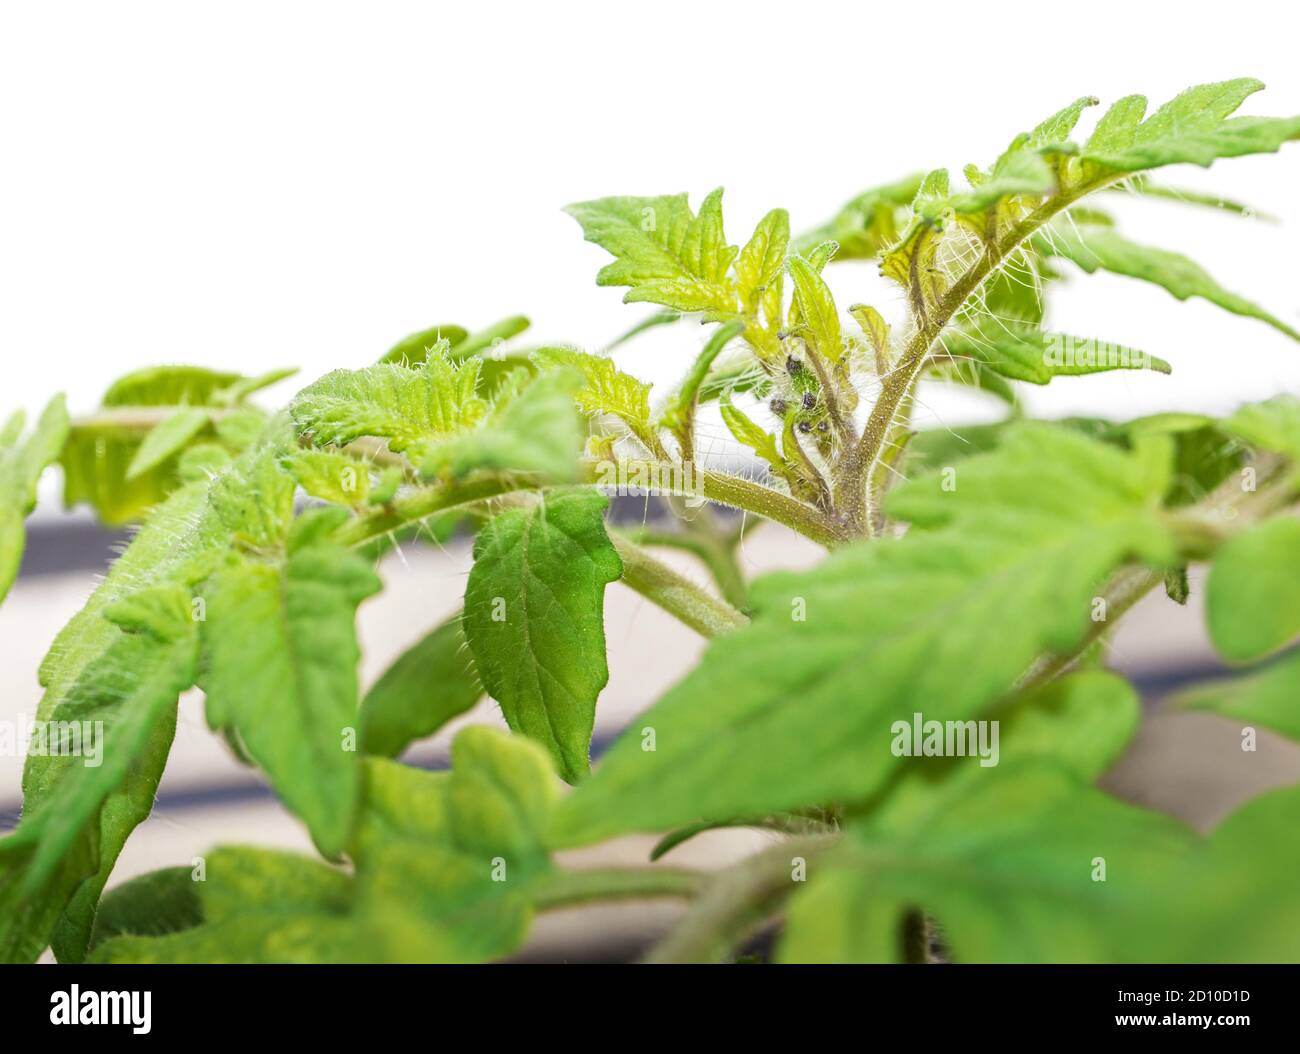 Young tomato seedling with first developing buds. Close up, macro. Foreground with soft green fresh leaves. Cherry tomato plant determinate 'Tumbling Stock Photo